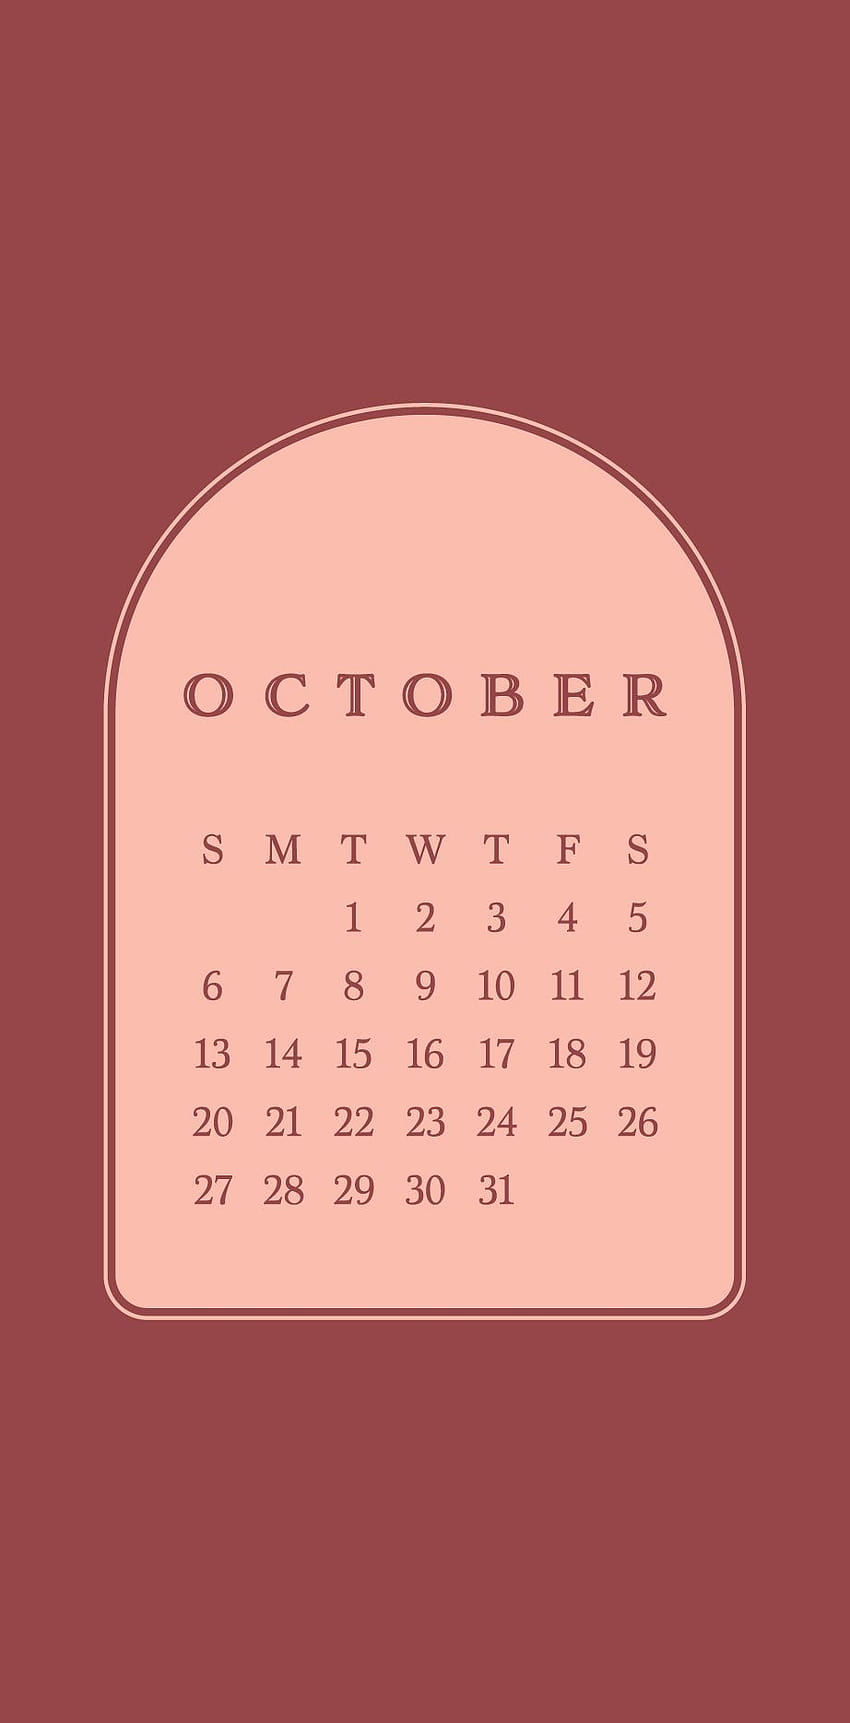 Happy OCTOBER!!! Omg ABC Family's 31 Nights of Halloween omg giant sweaters omg falling leaves and b… HD phone wallpaper